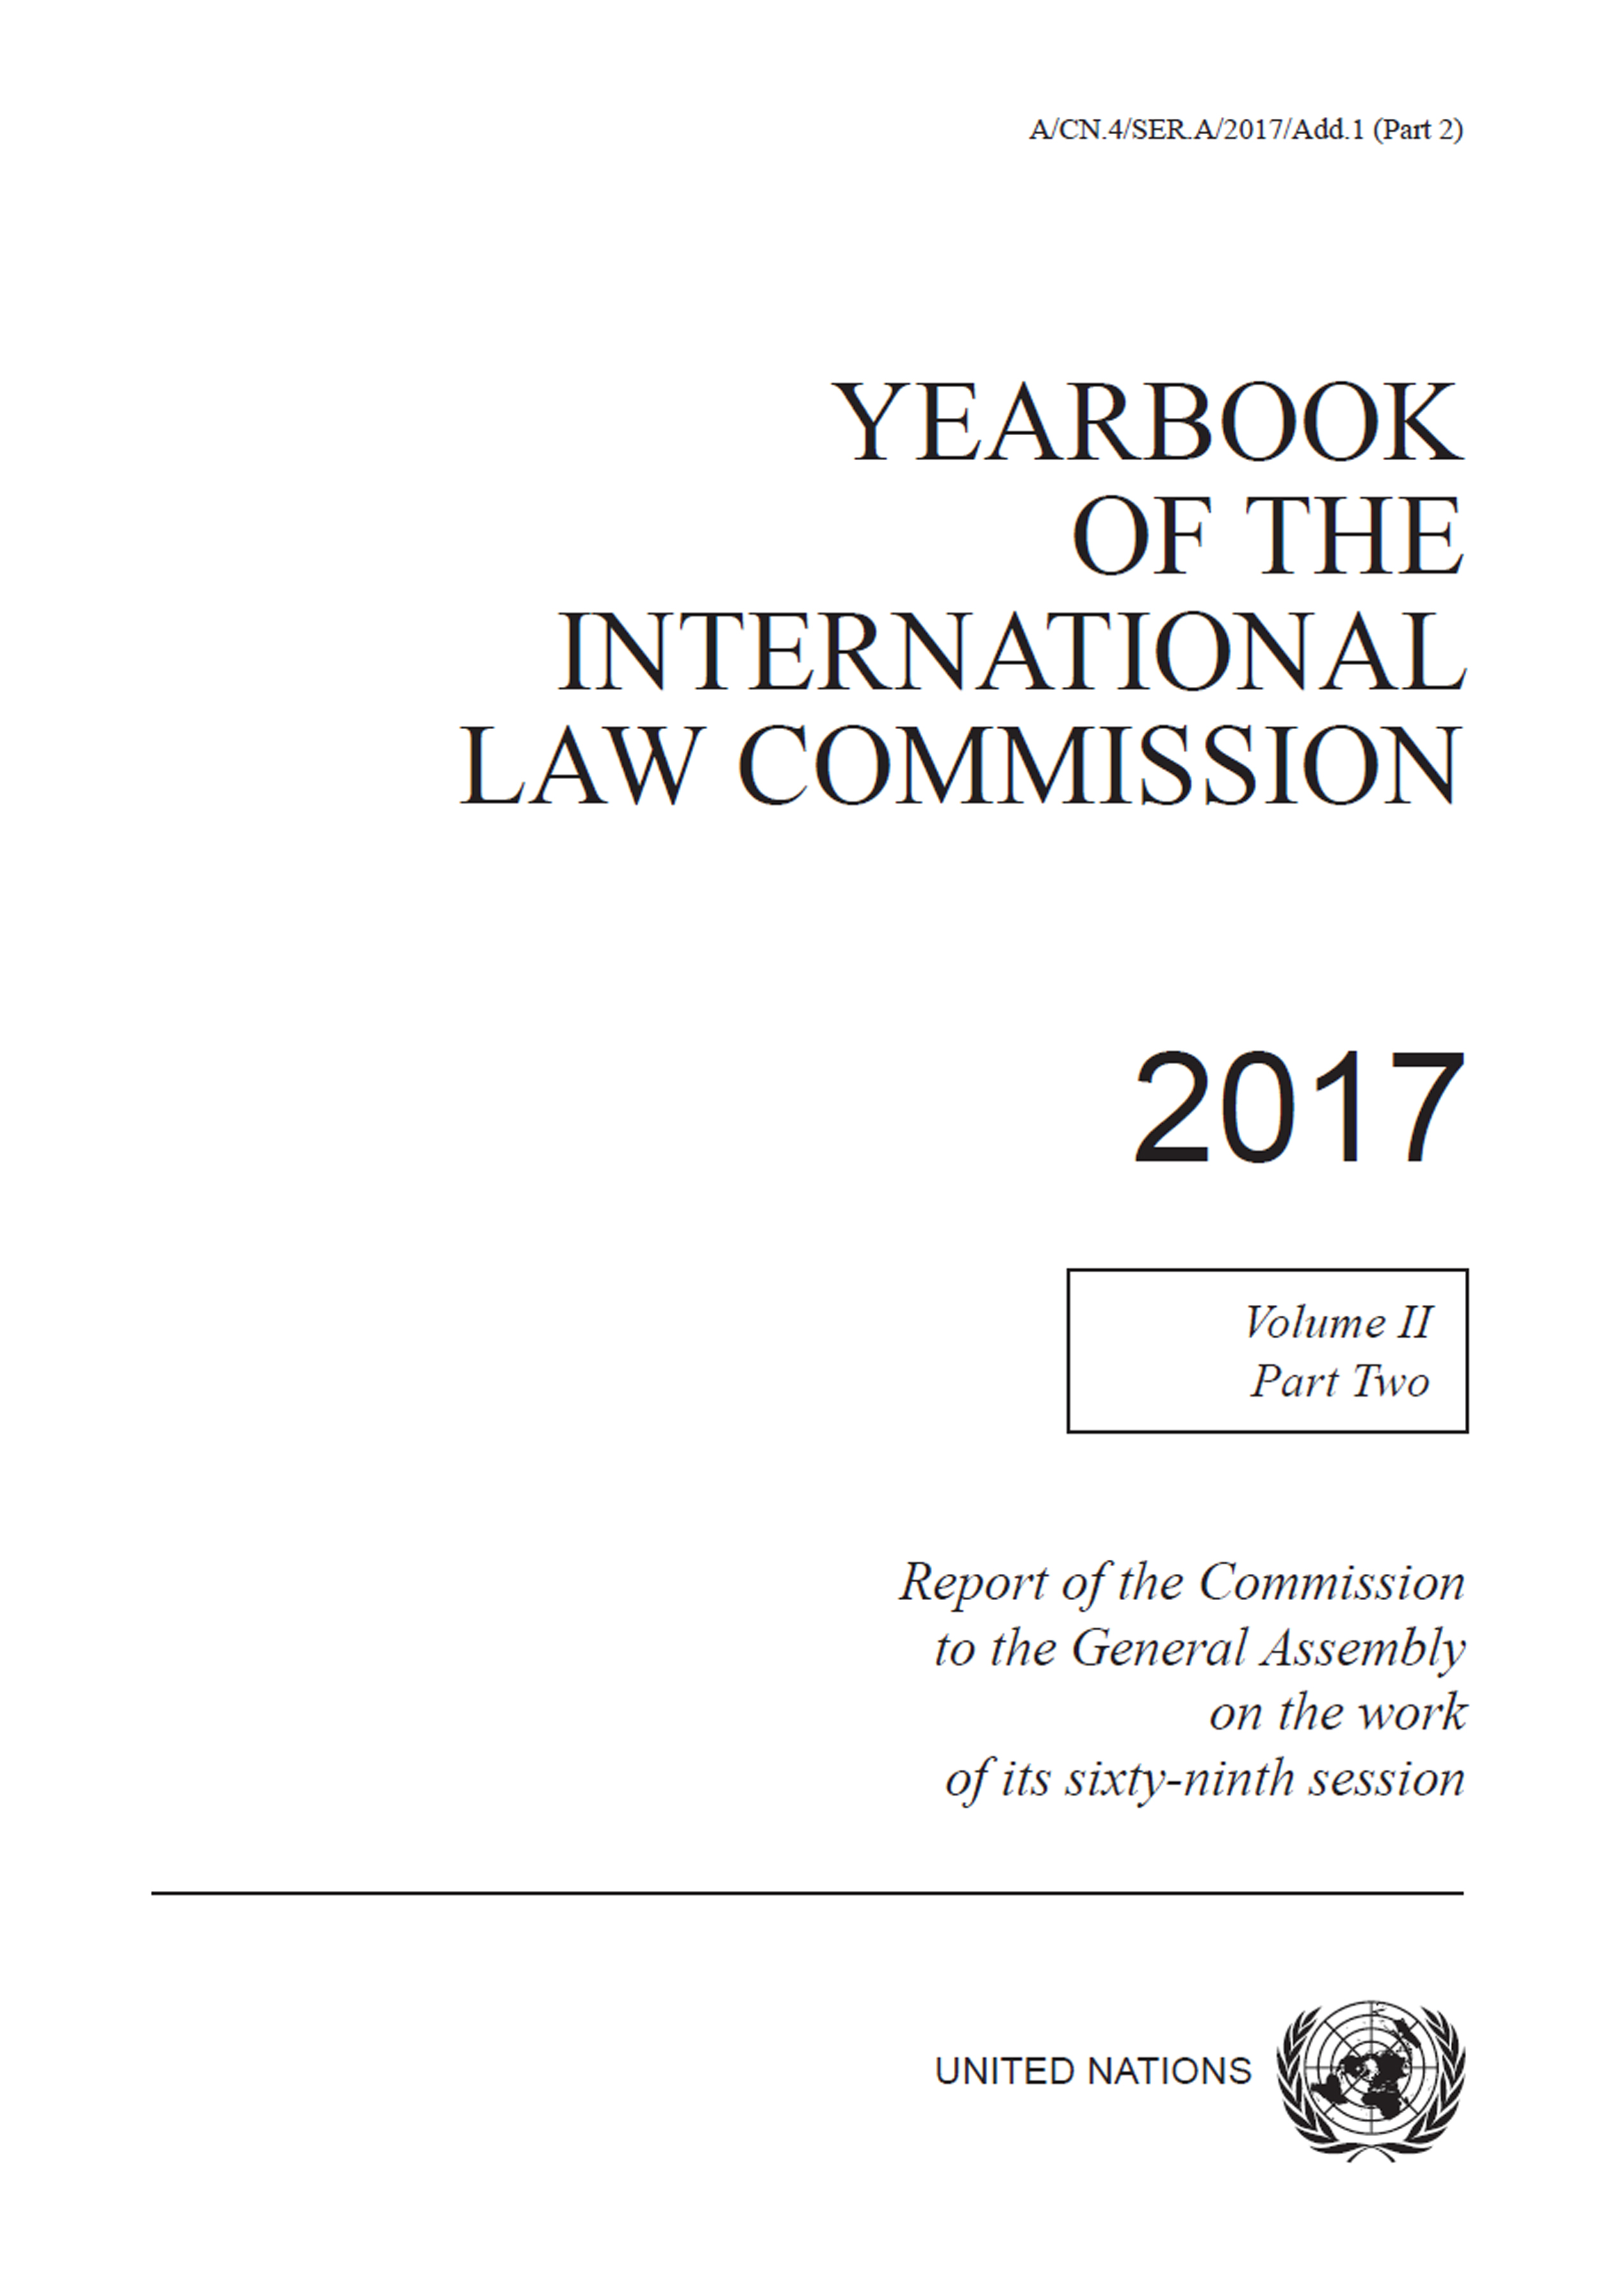 image of Yearbook of the International Law Commission 2017, Vol. II, Part 2